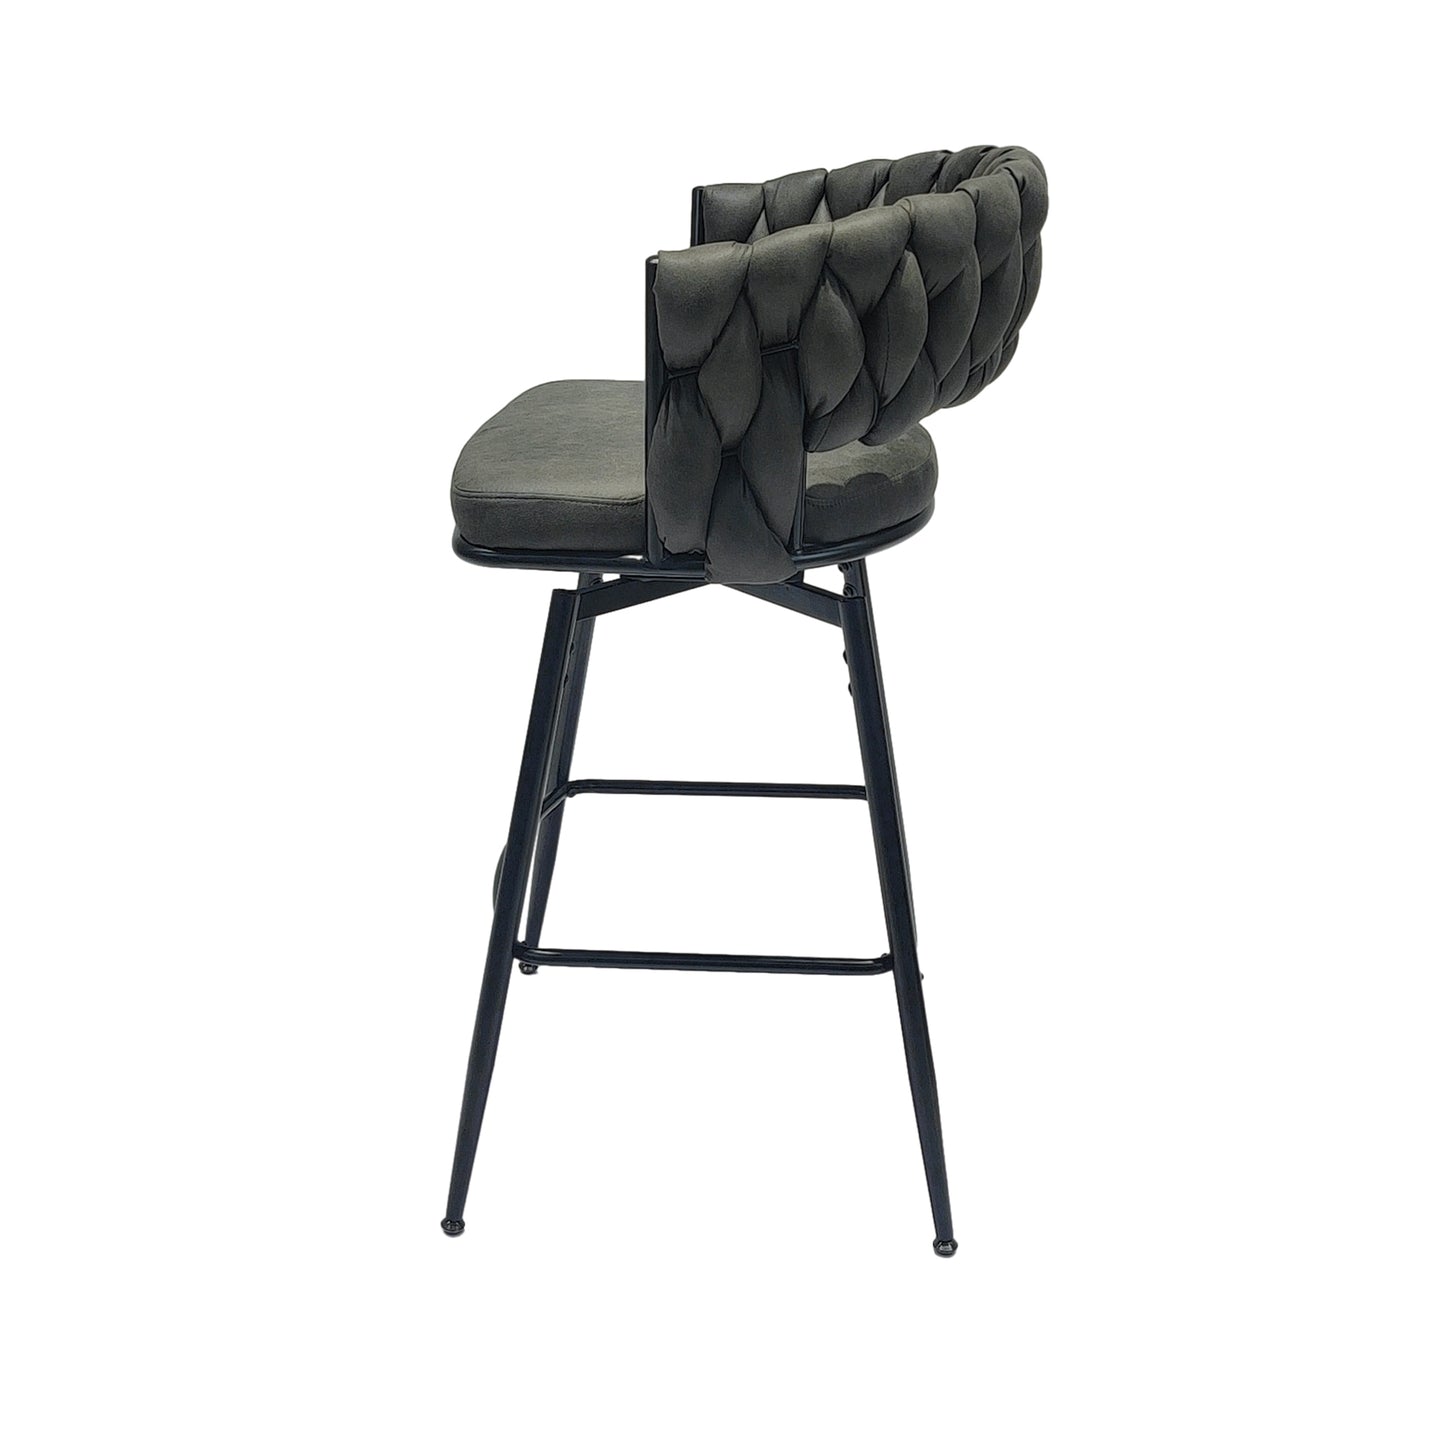 1st Choice Technical Leather Woven Upholstered Bar Stool - Set of 2